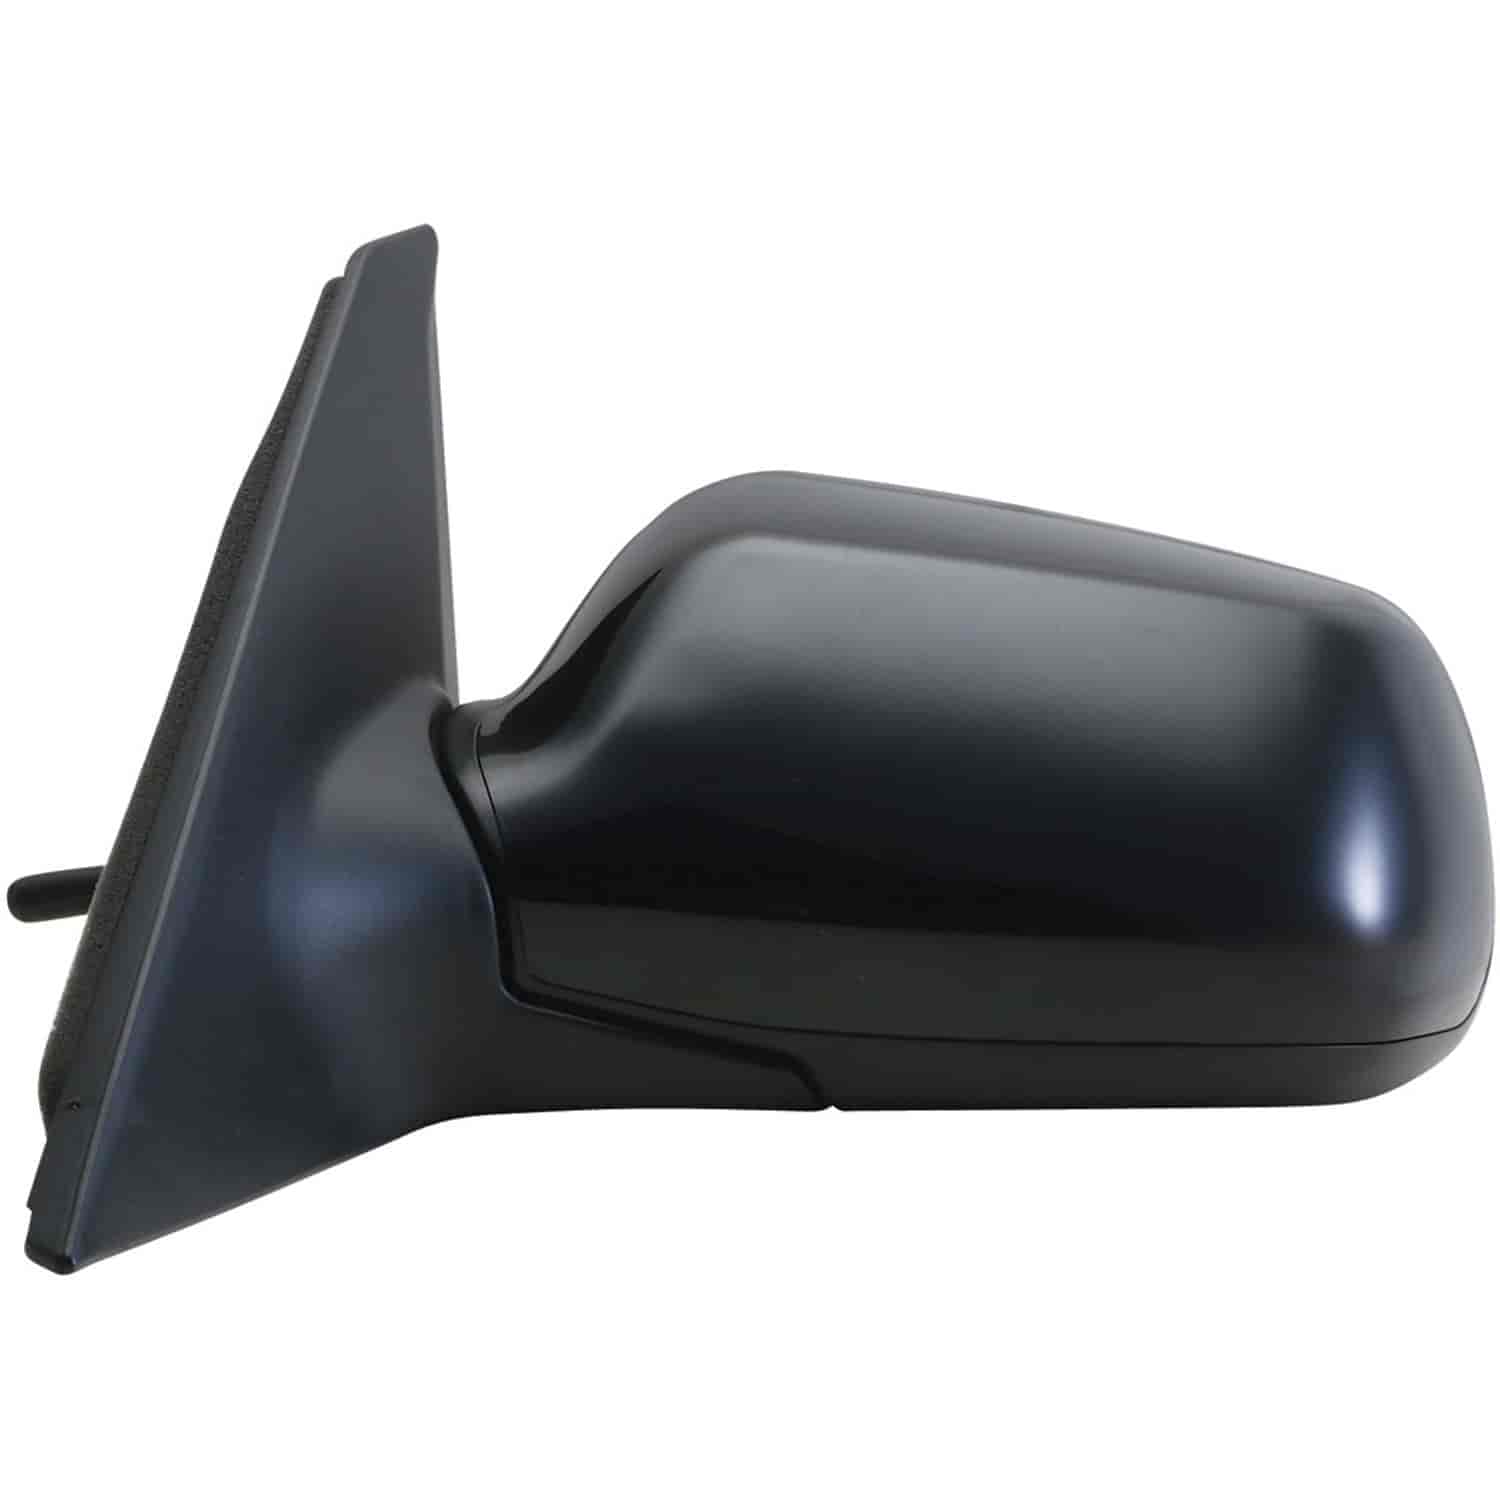 OEM Style Replacement mirror for 04-09 Mazda 3 driver side mirror tested to fit and function like th